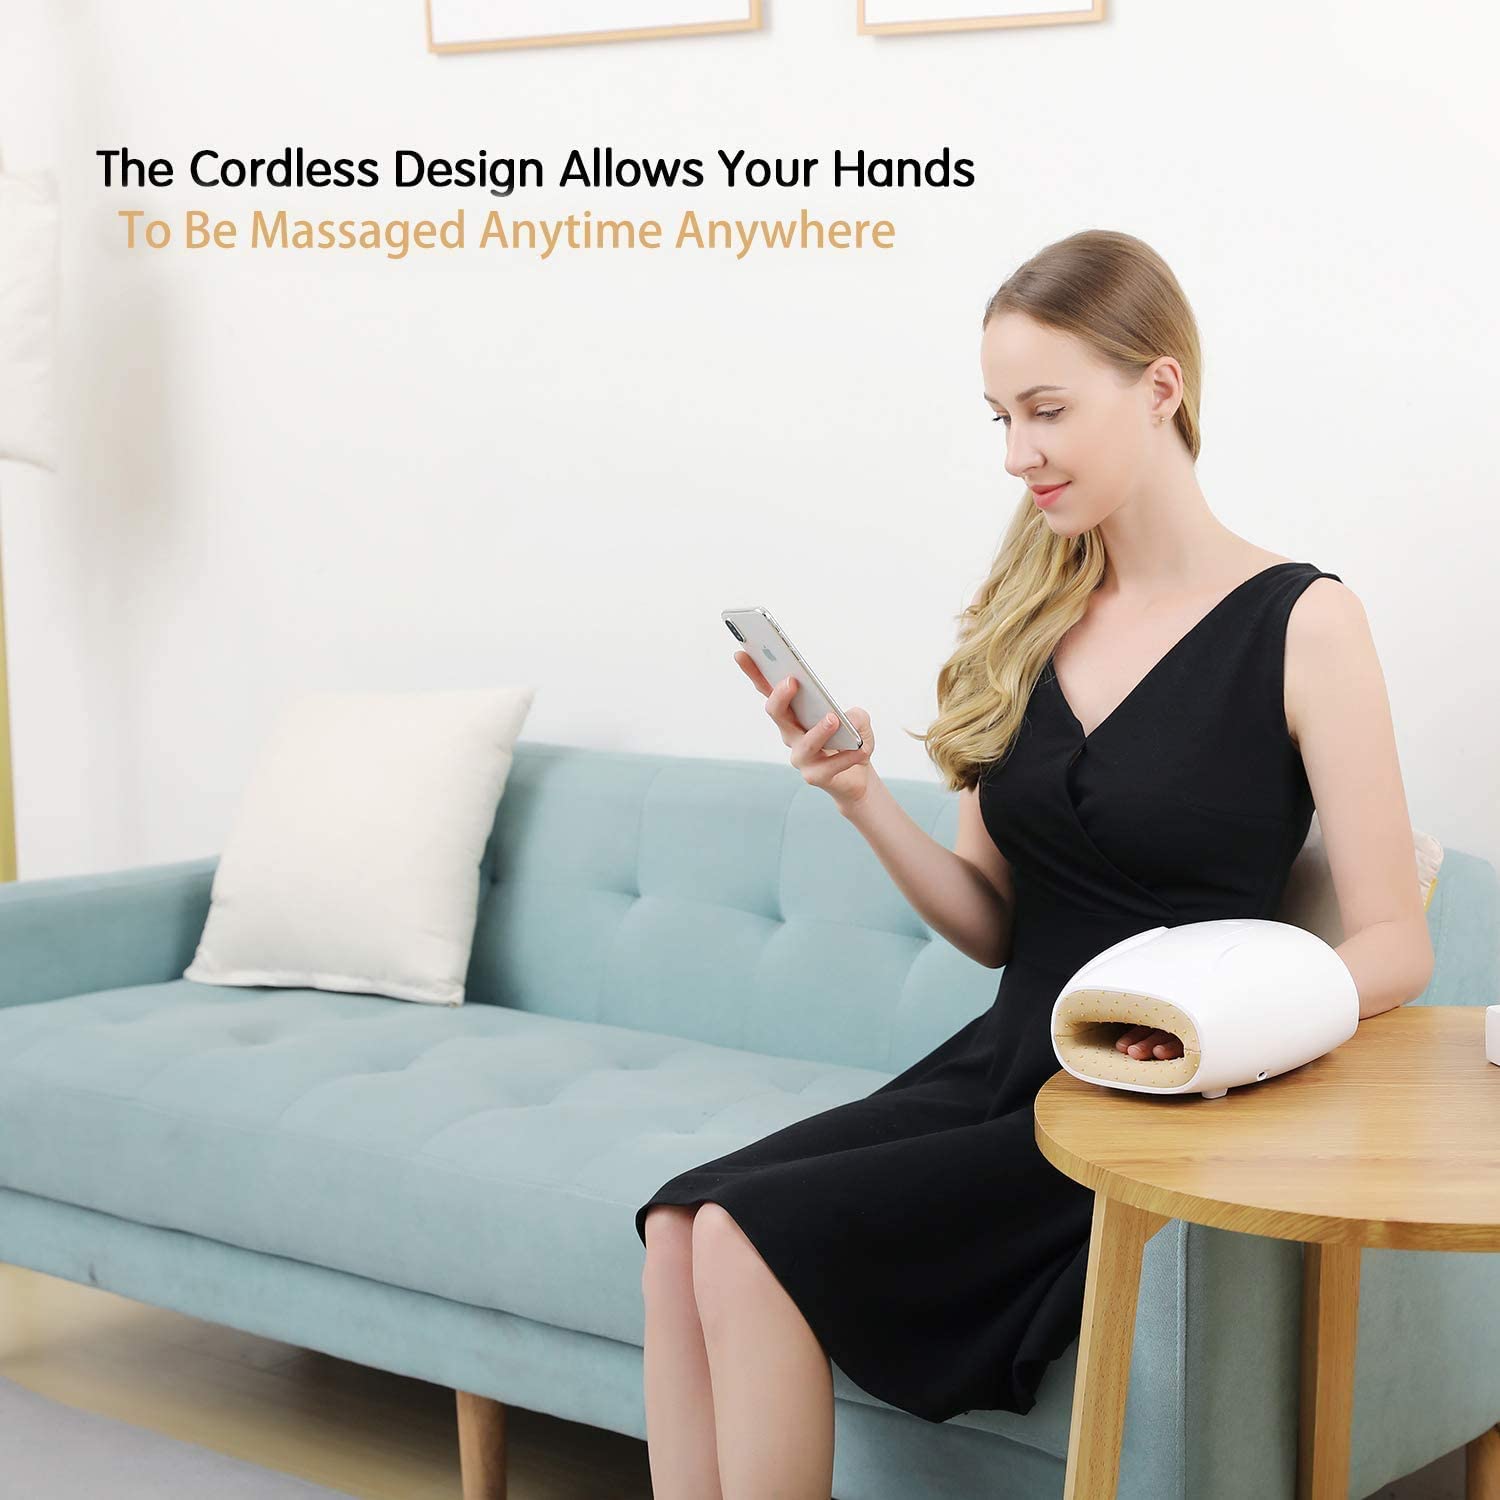 Electric Hand Therapy Massager【WORLDWIDE FREE SHIPPING】